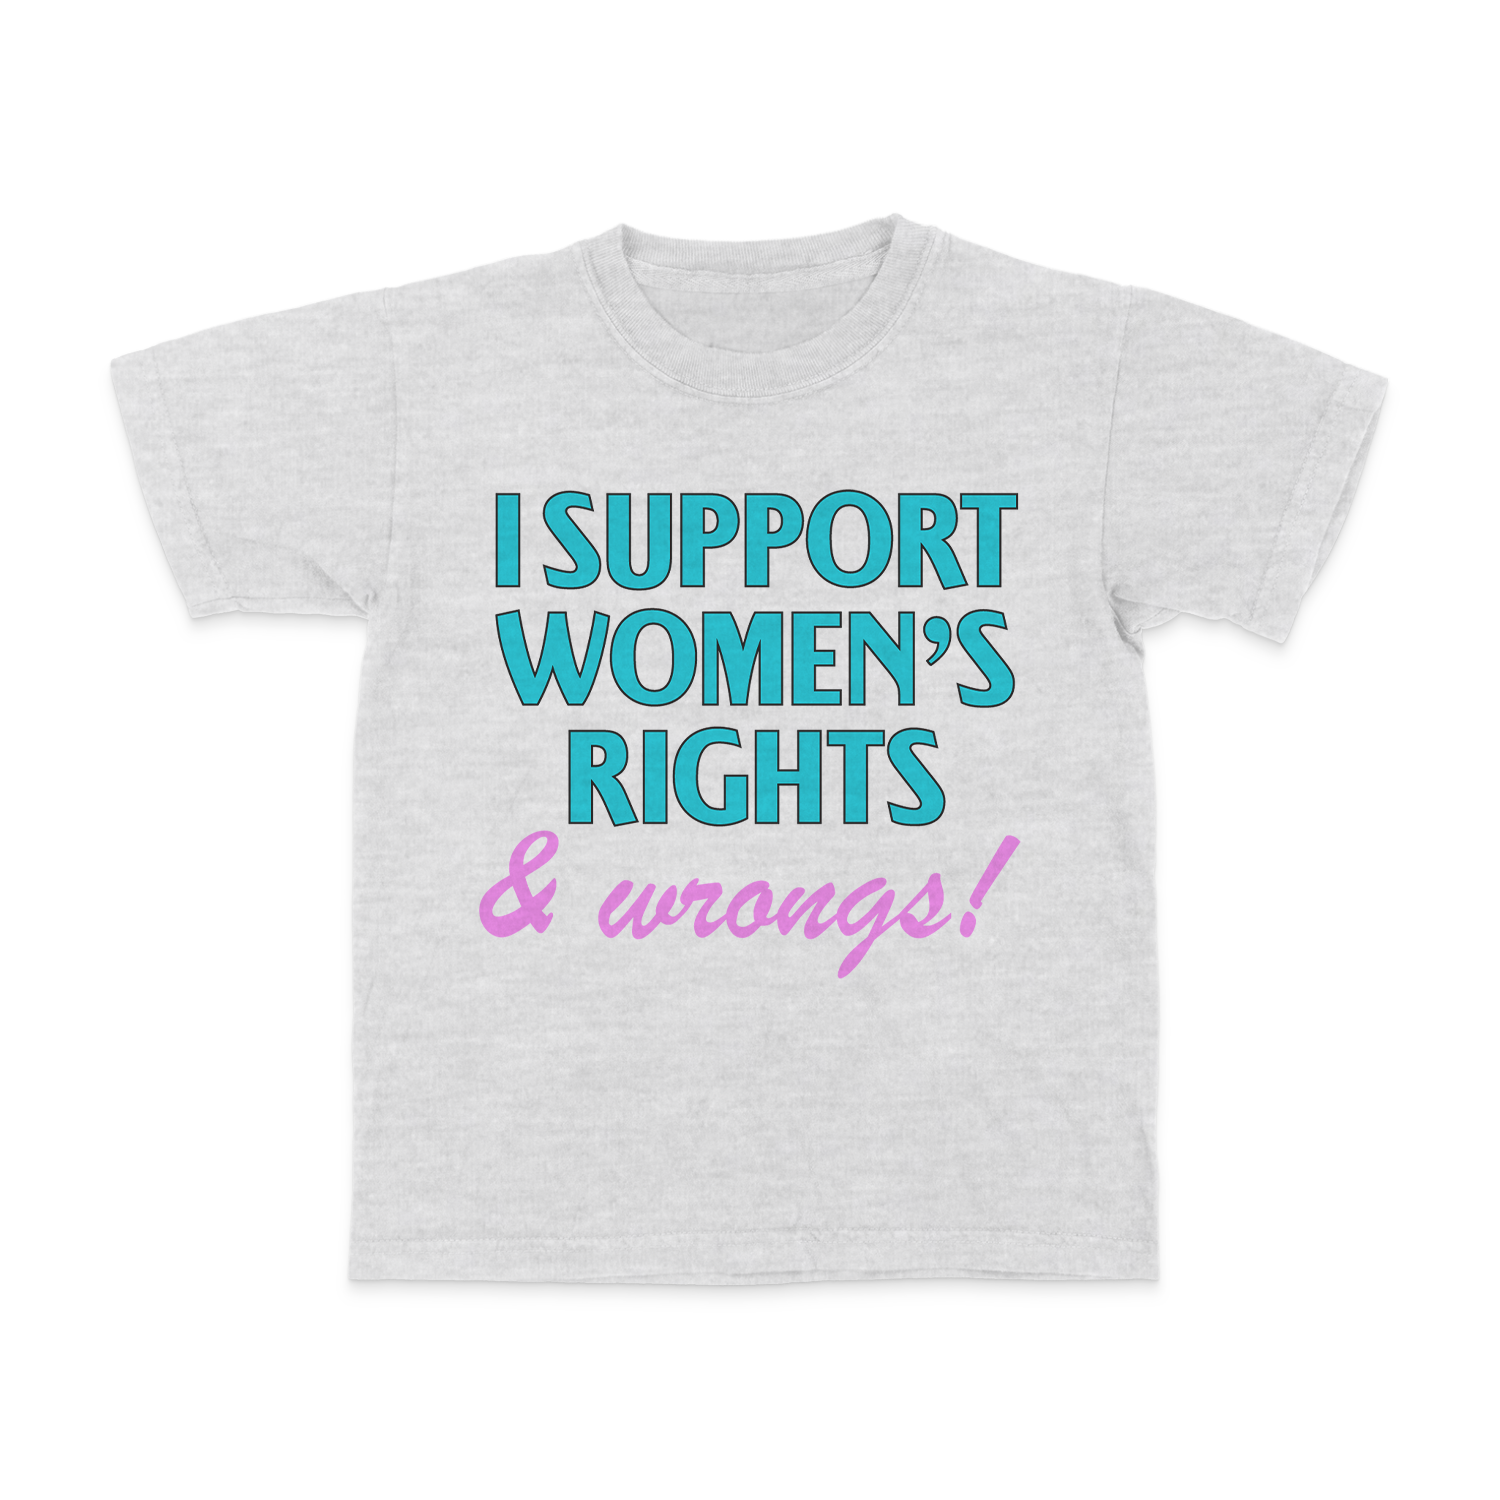 I Support Women's Rights & Wrongs Baby Tee